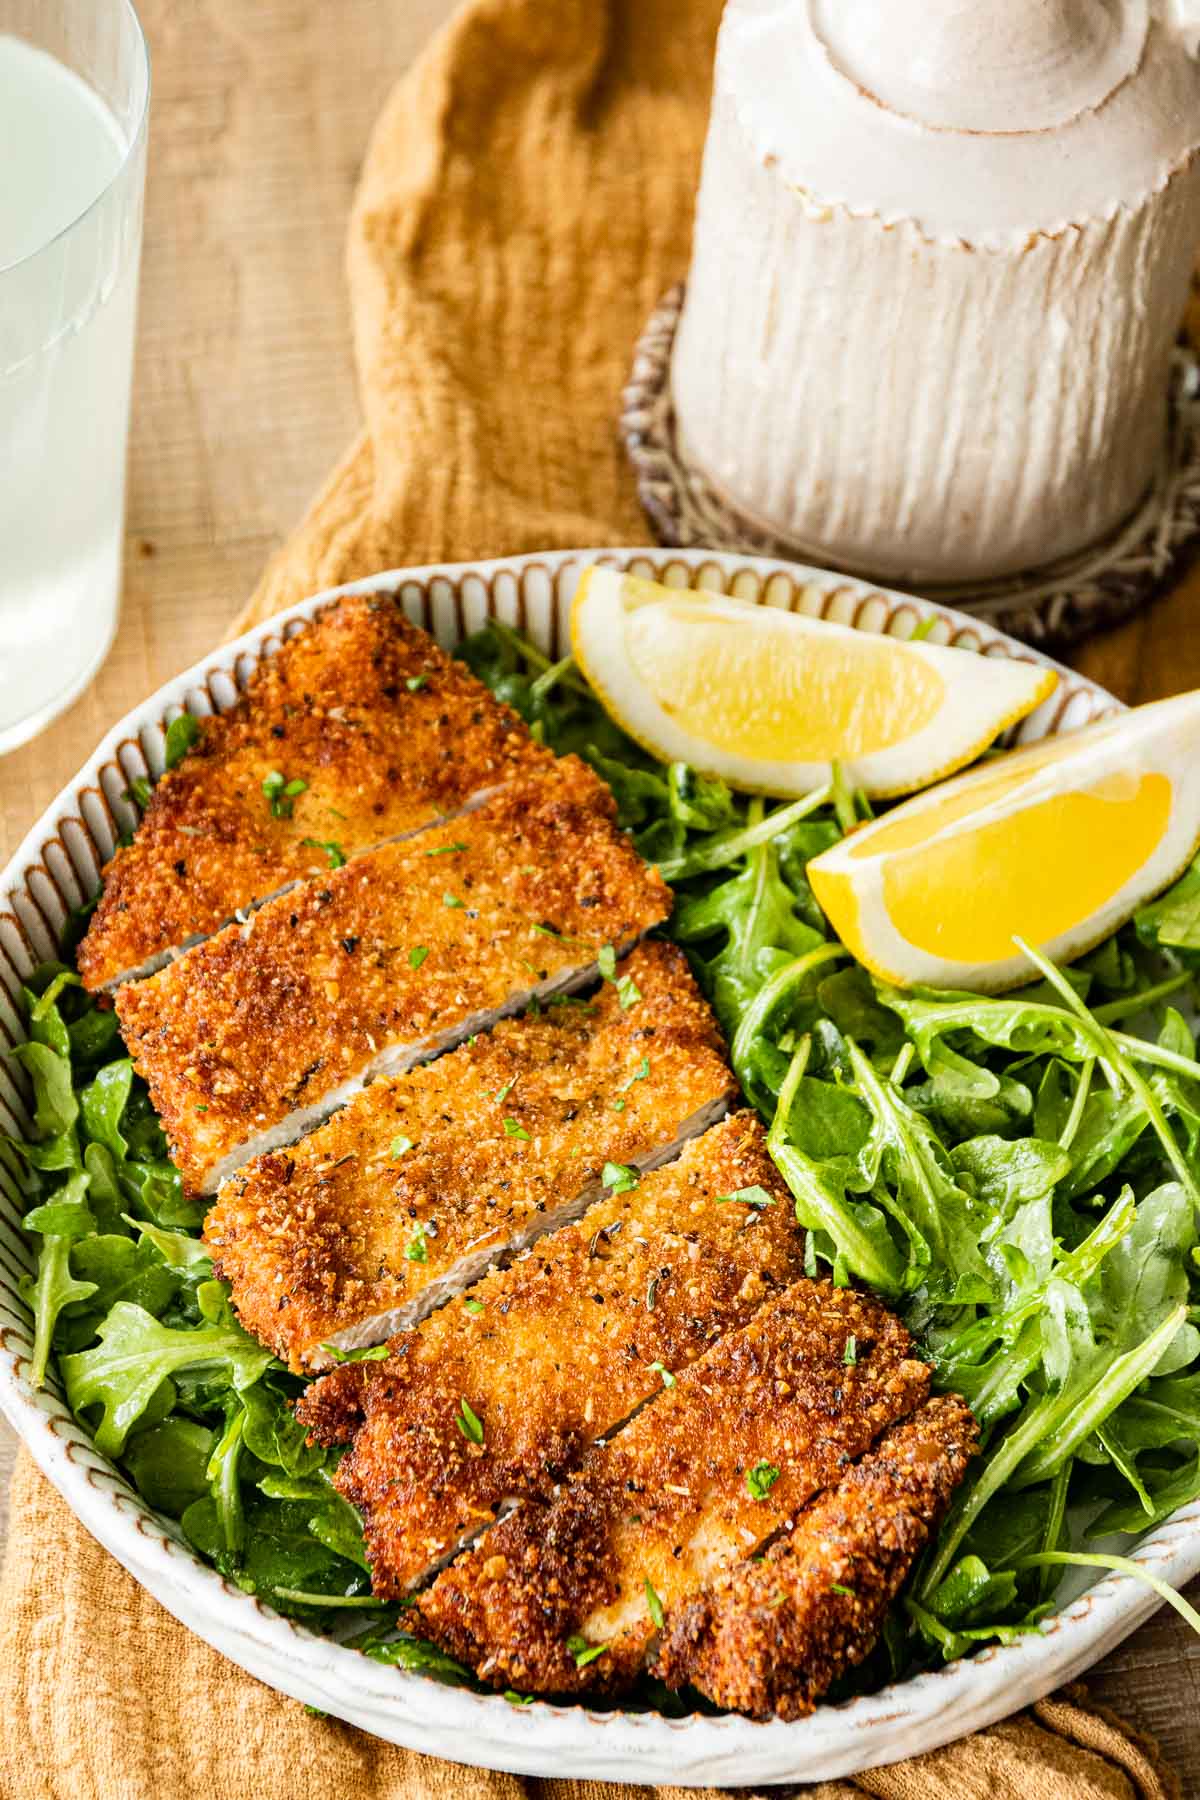 Crispy Breaded Chicken sliced on plate with greens and lemons